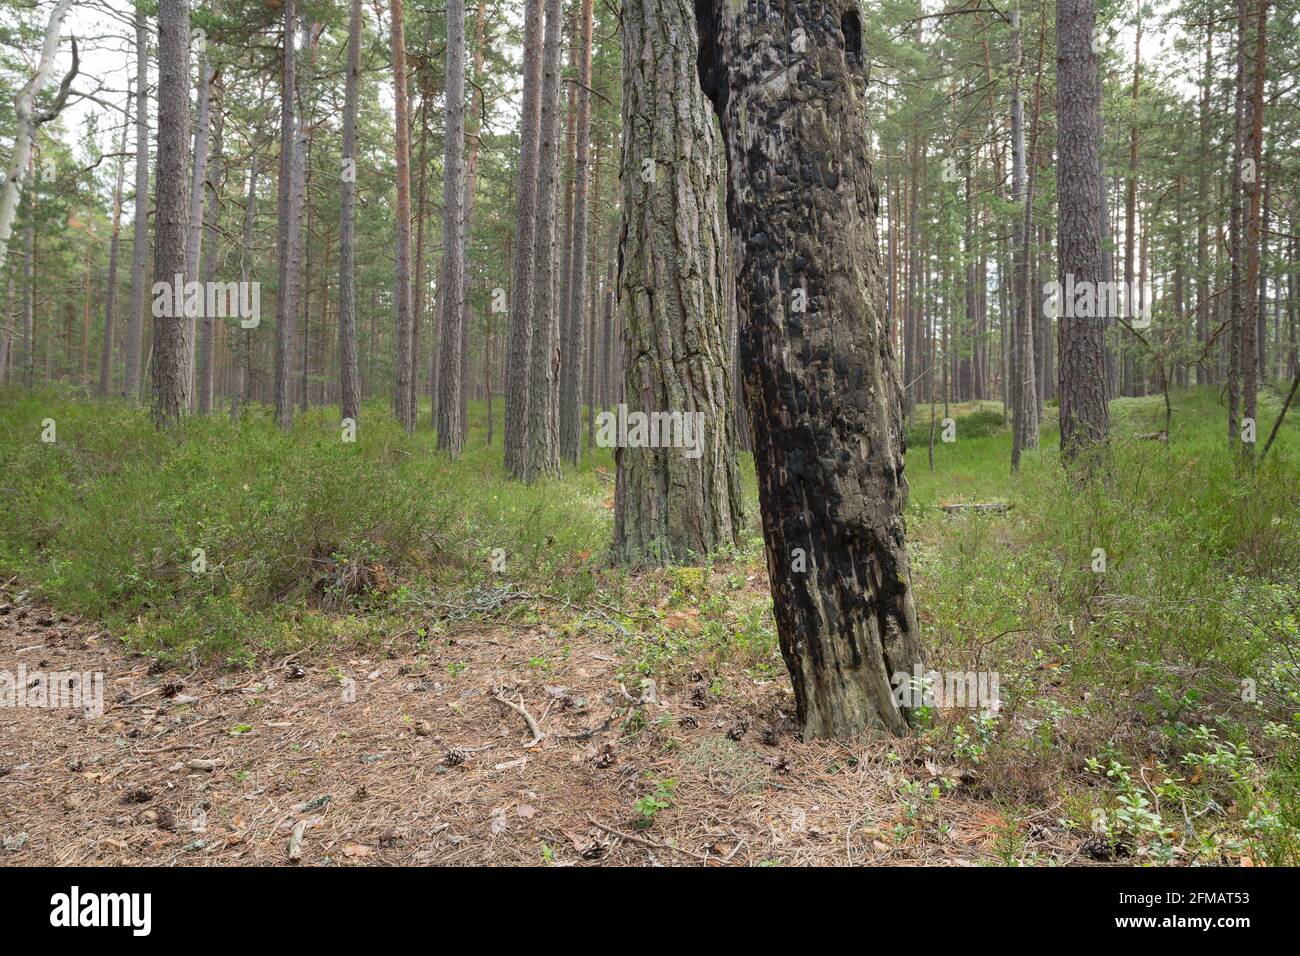 Burnt pine tree in natural pine forest, heather plants grows in the environment Stock Photo